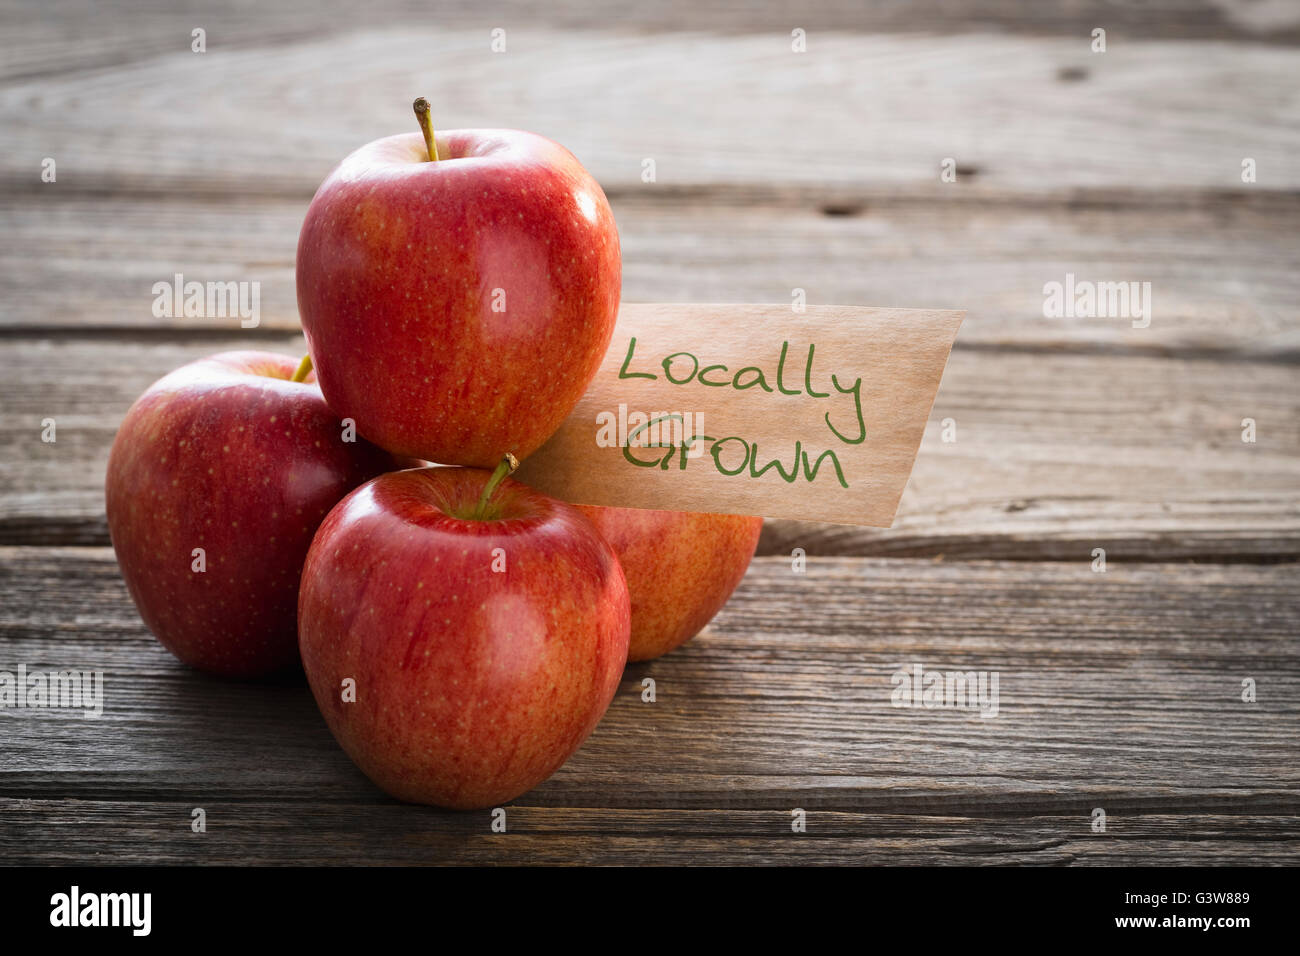 Red apples on wooden market stall Stock Photo